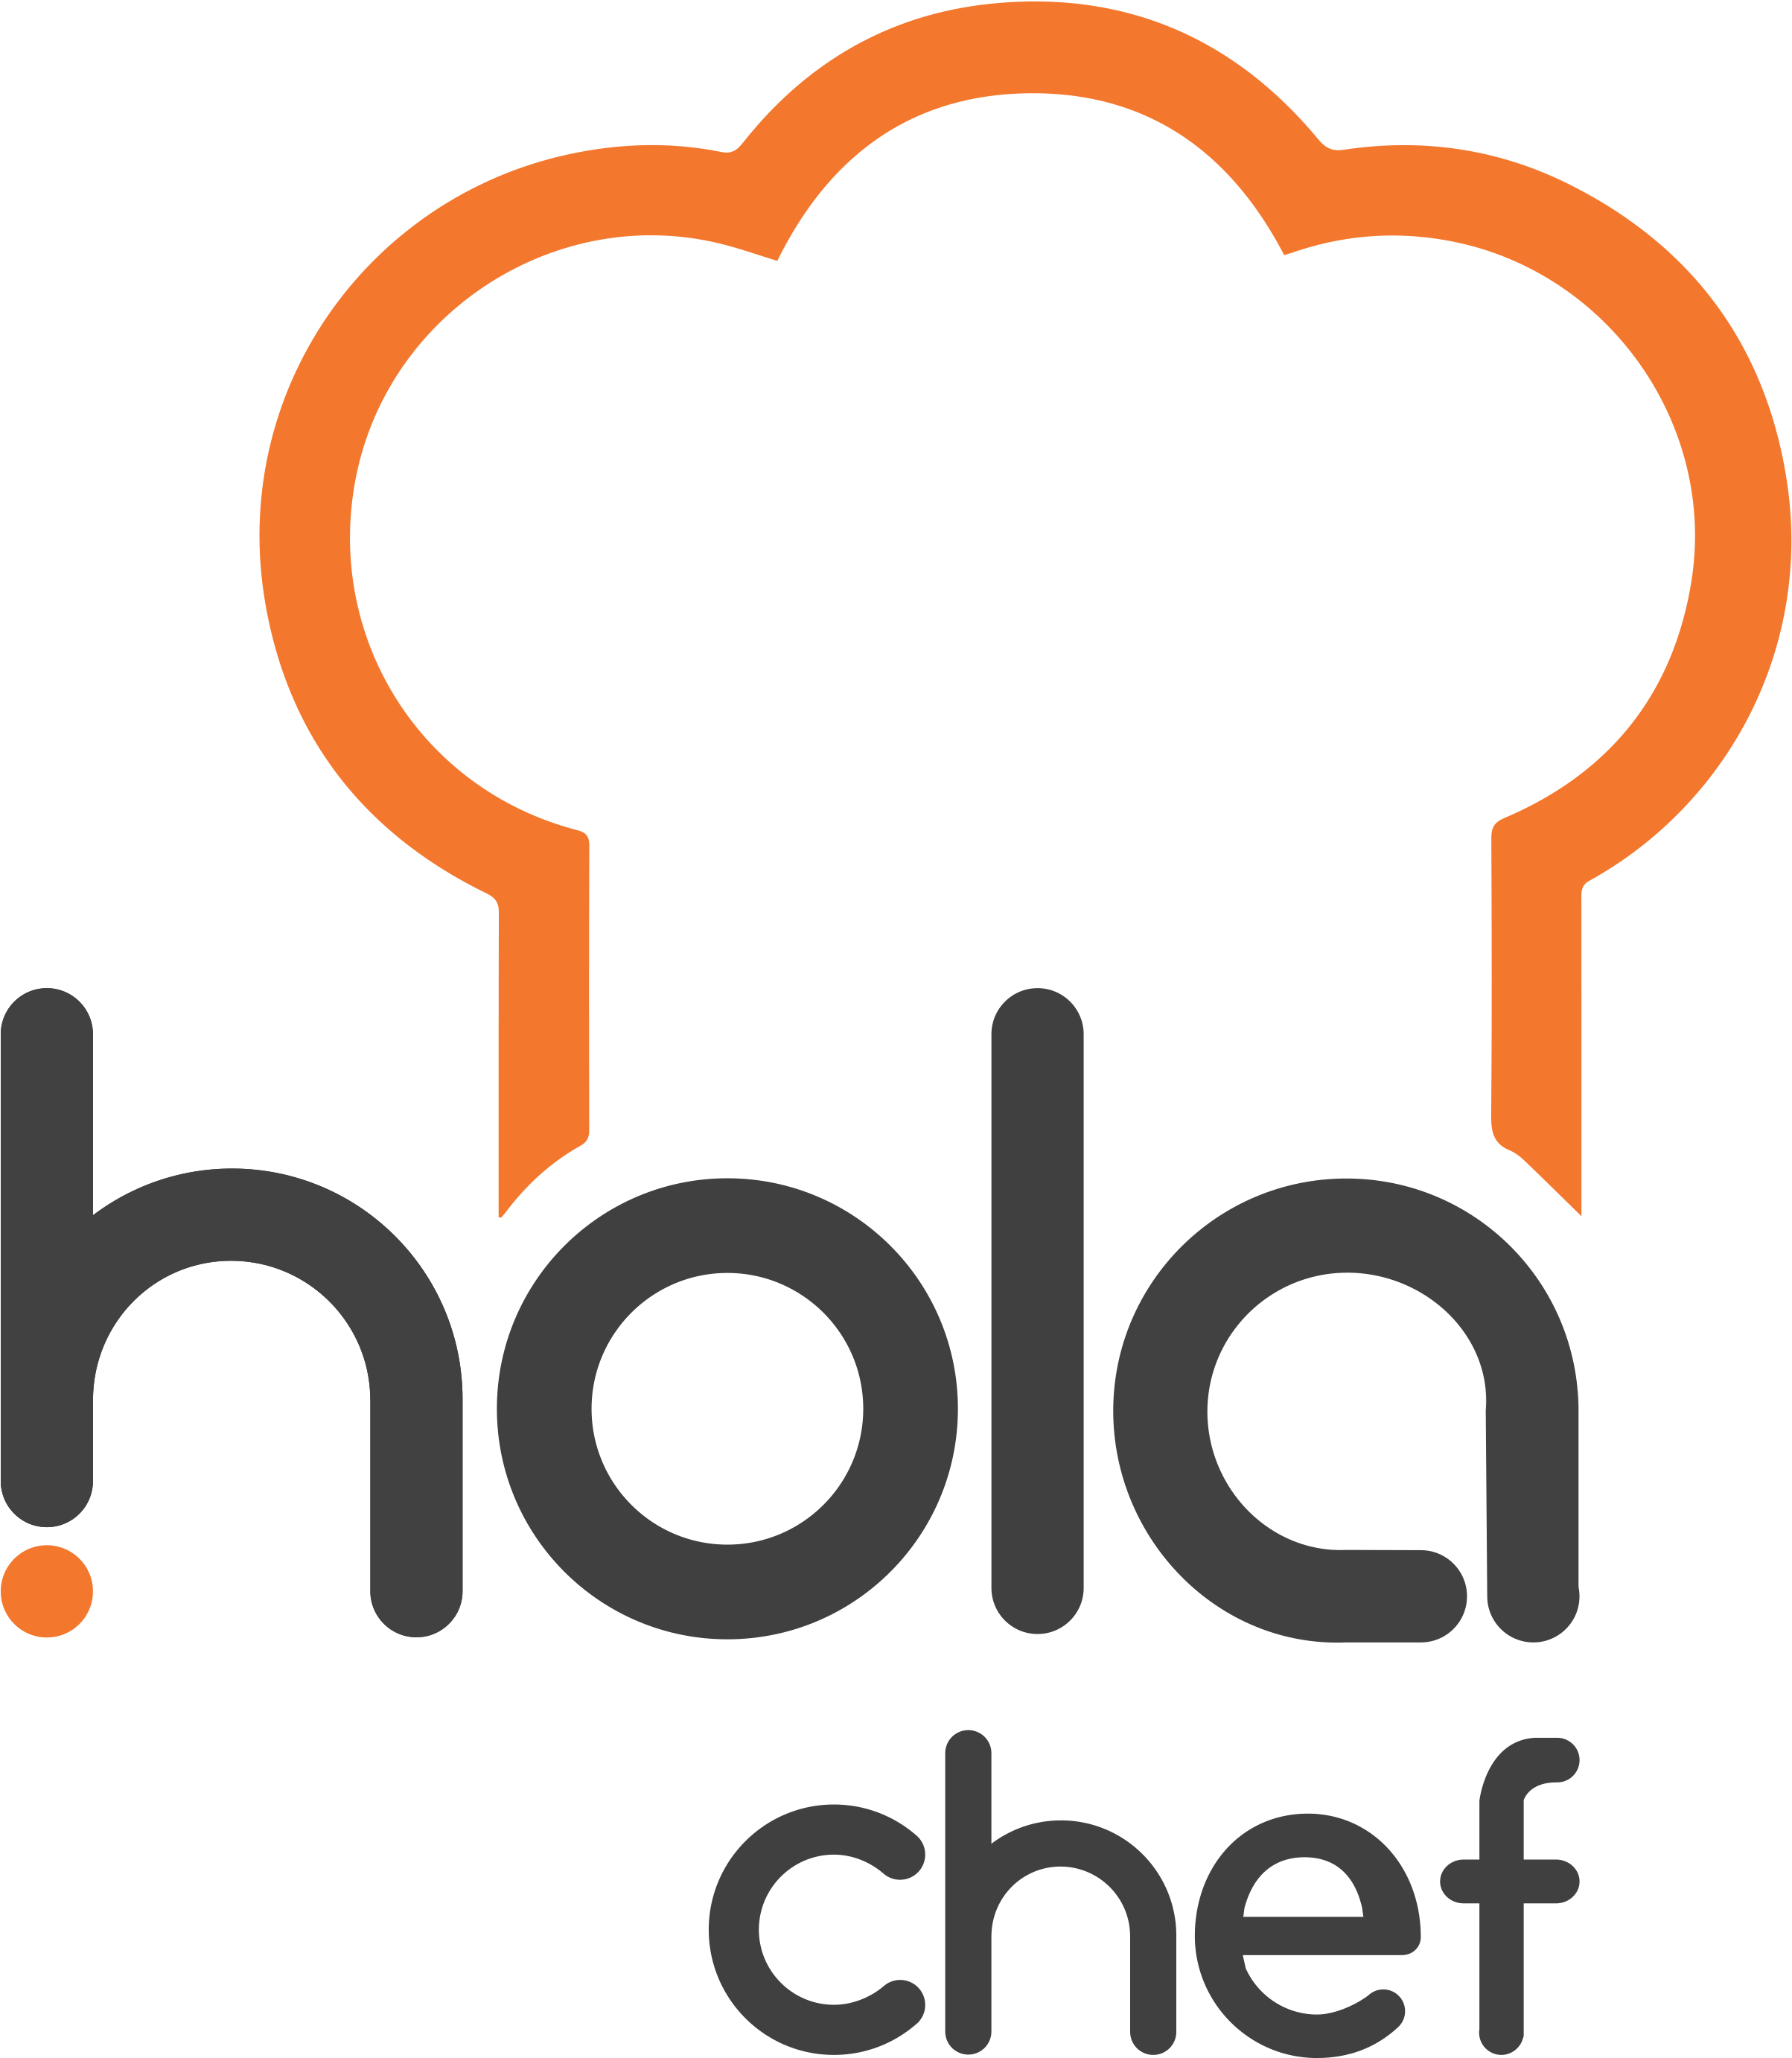 Holachef Customer Care Contact Details - Hola Chef (2435x2777)